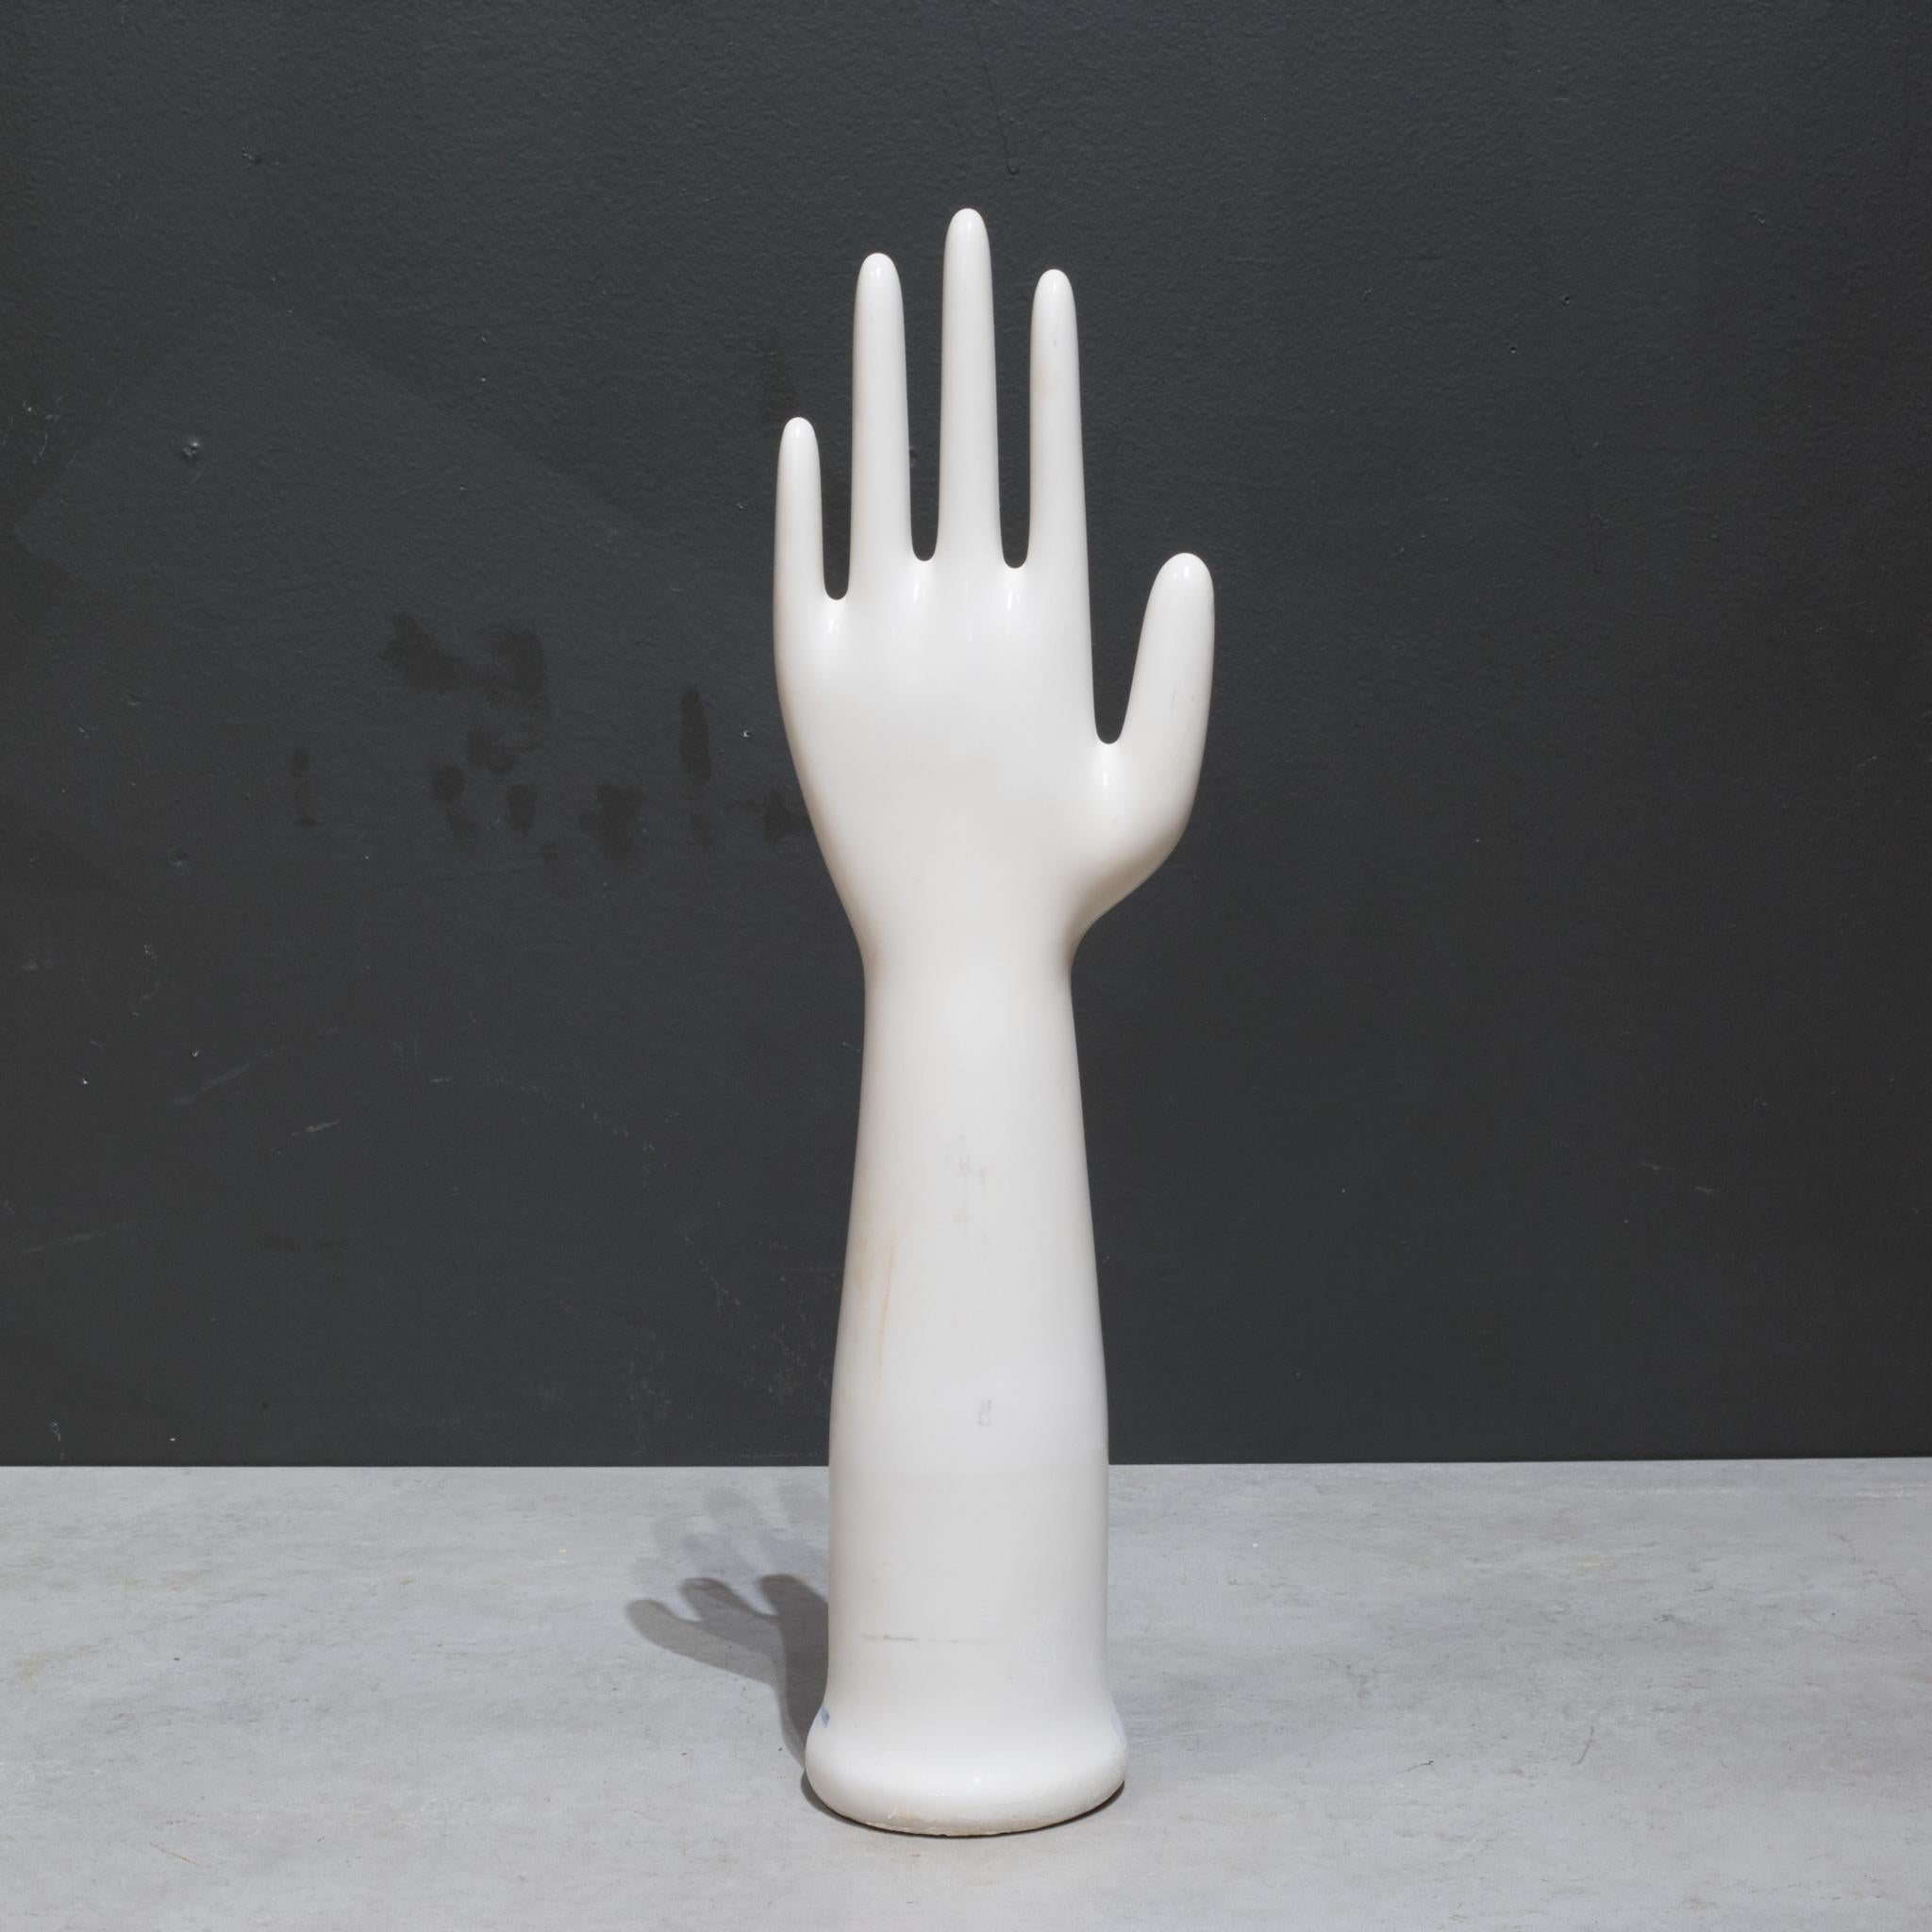 Industrial Vintage Glazed Porcelain Factory Rubber Glove Molds, c.1992  (FREE SHIPPING) For Sale